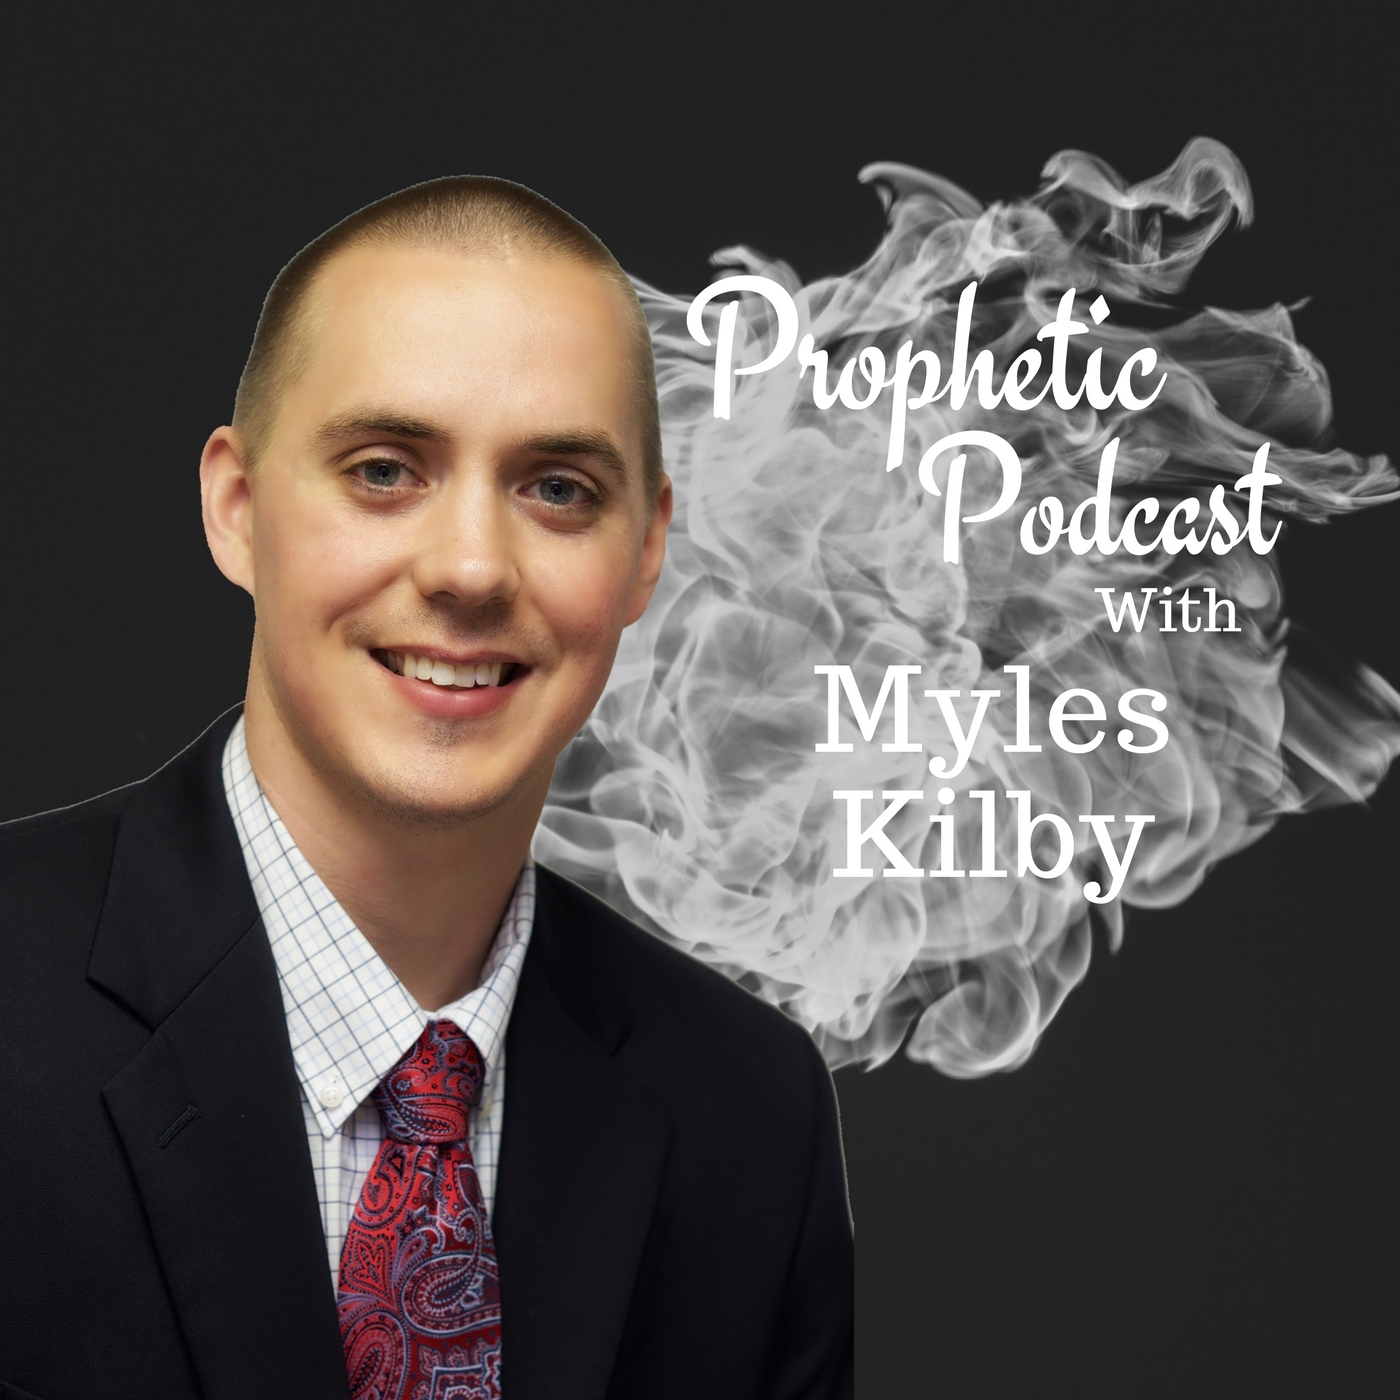 Welcome to Prophetic Podcast with Myles Kilby